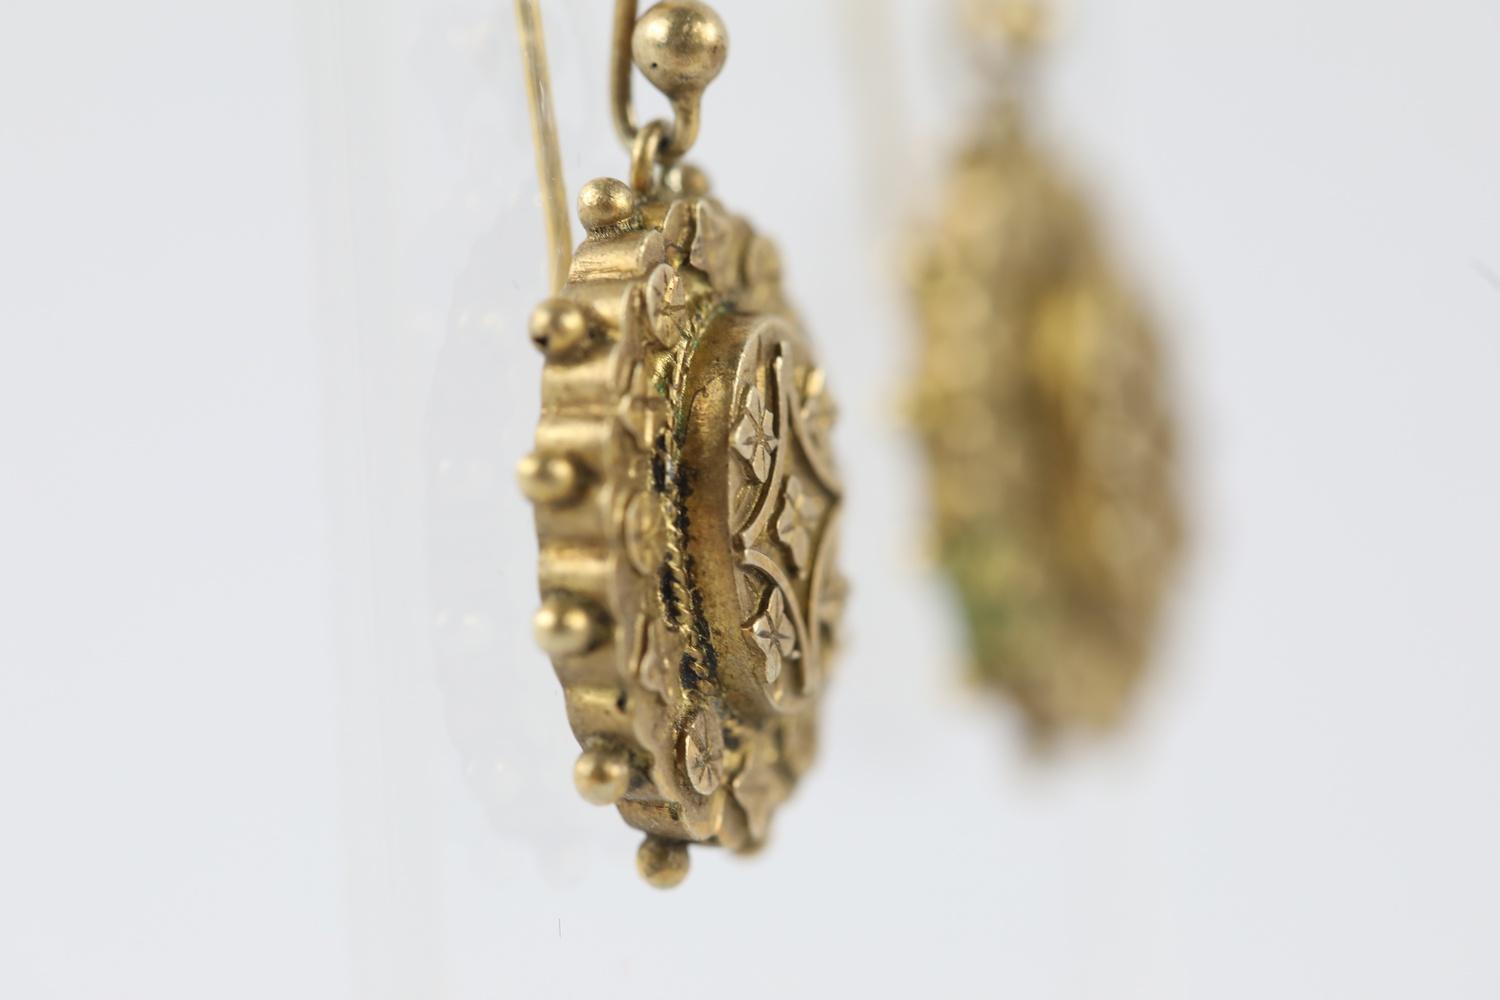 Antique Victorian silver gilt earrings in original box - Image 2 of 4